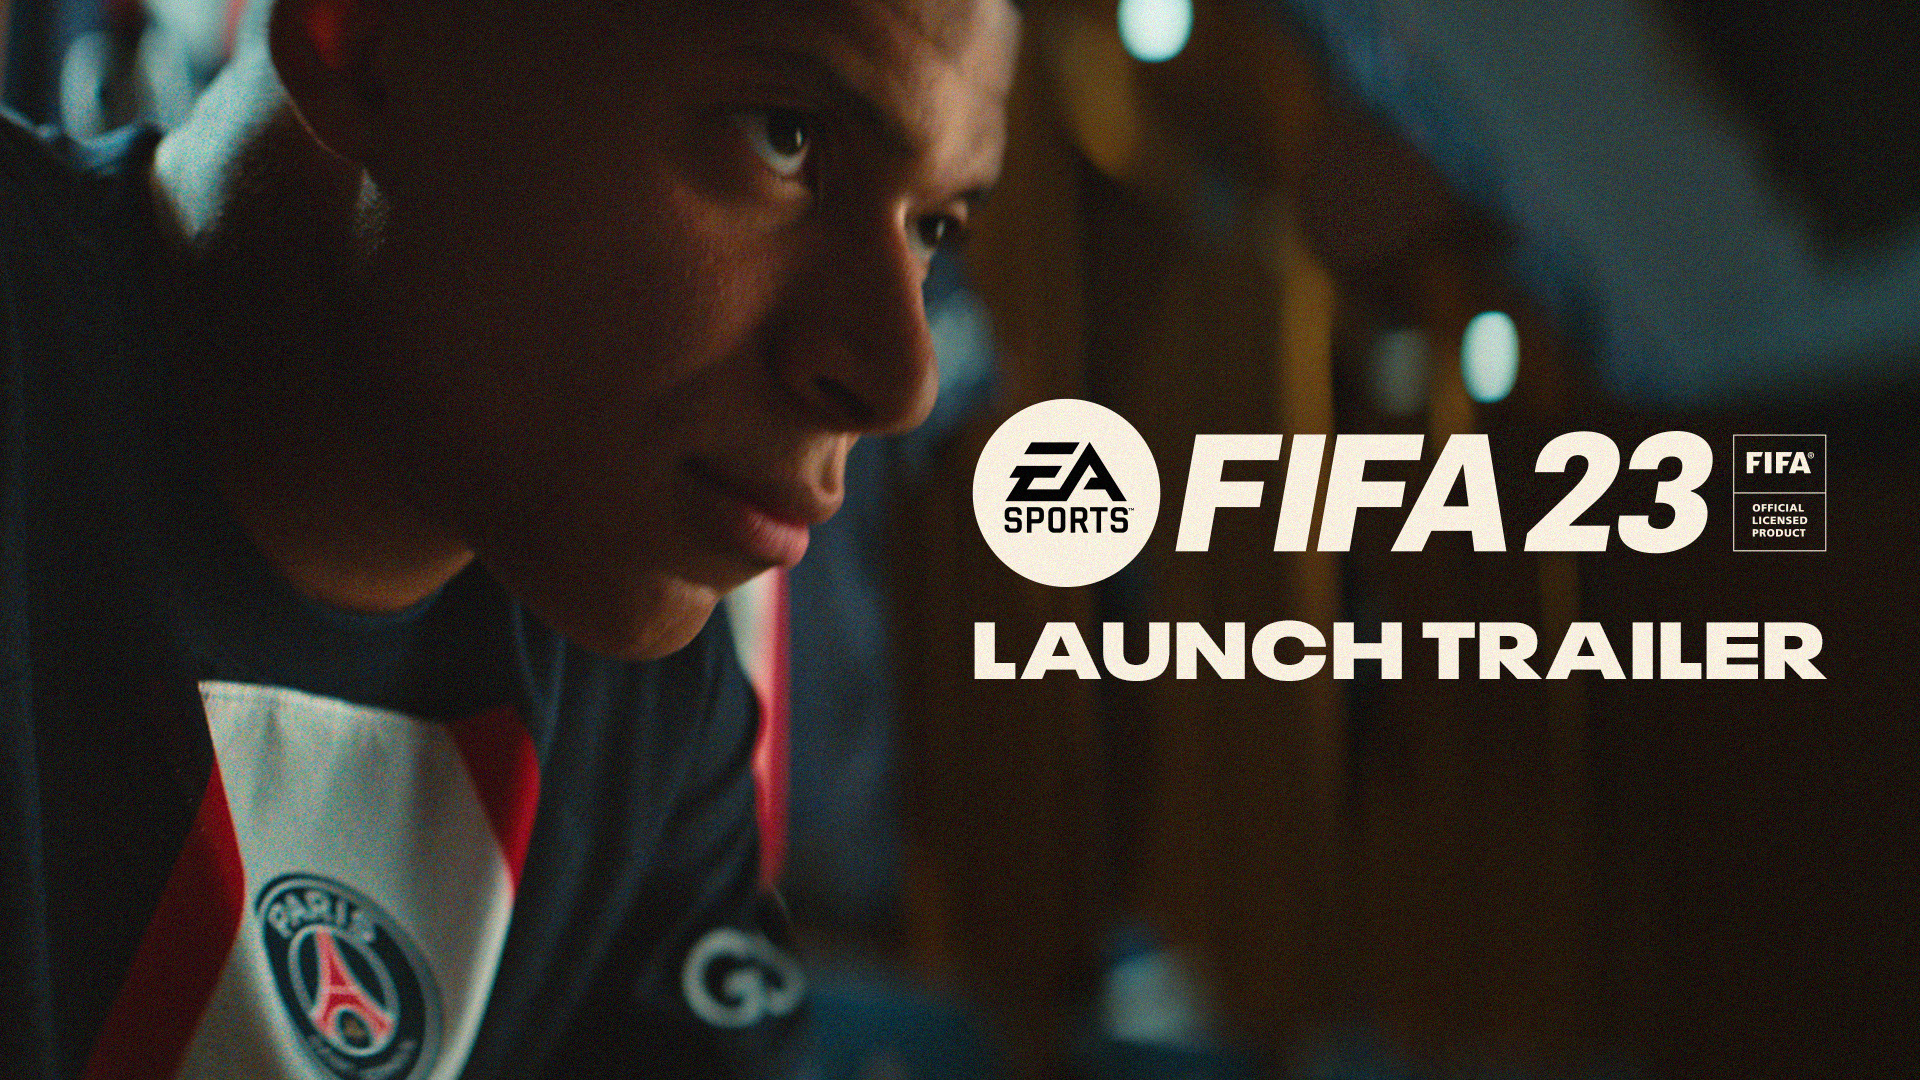 The FIFA 23 web app is now live, offering early access to FUT 23